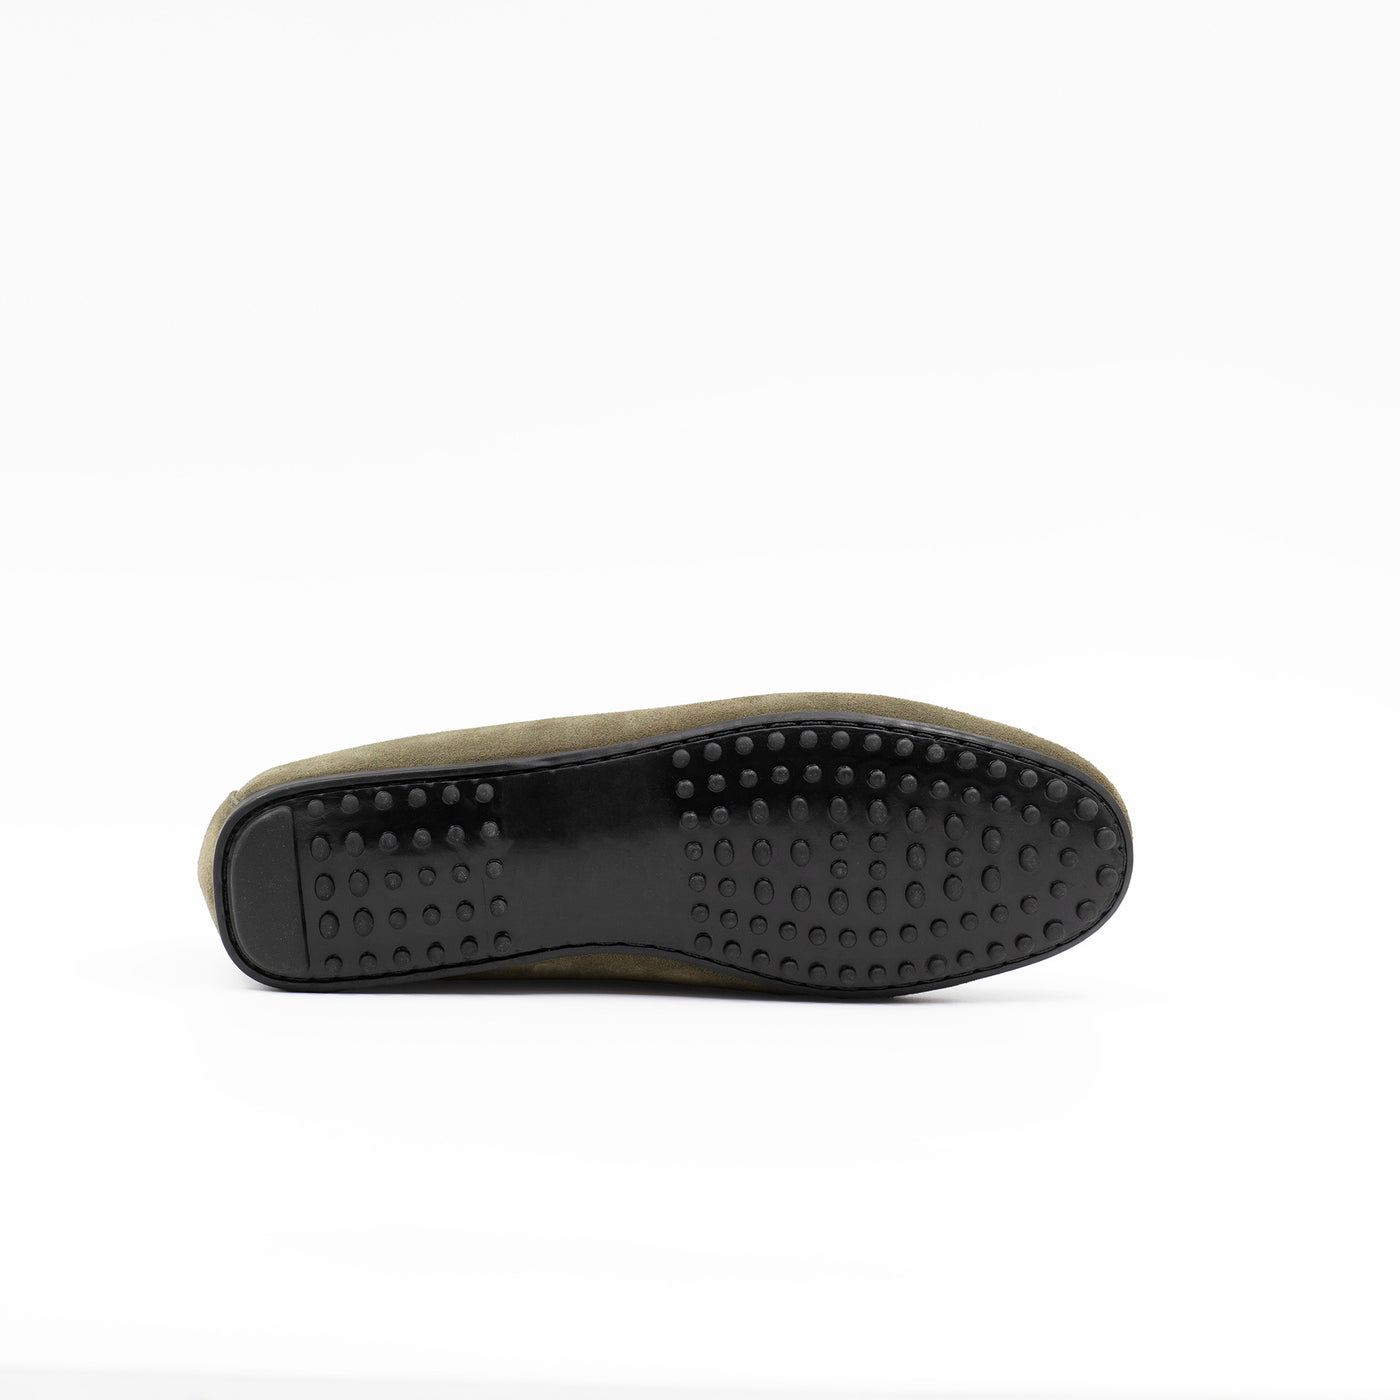 Rubber sole with rubber pebbles